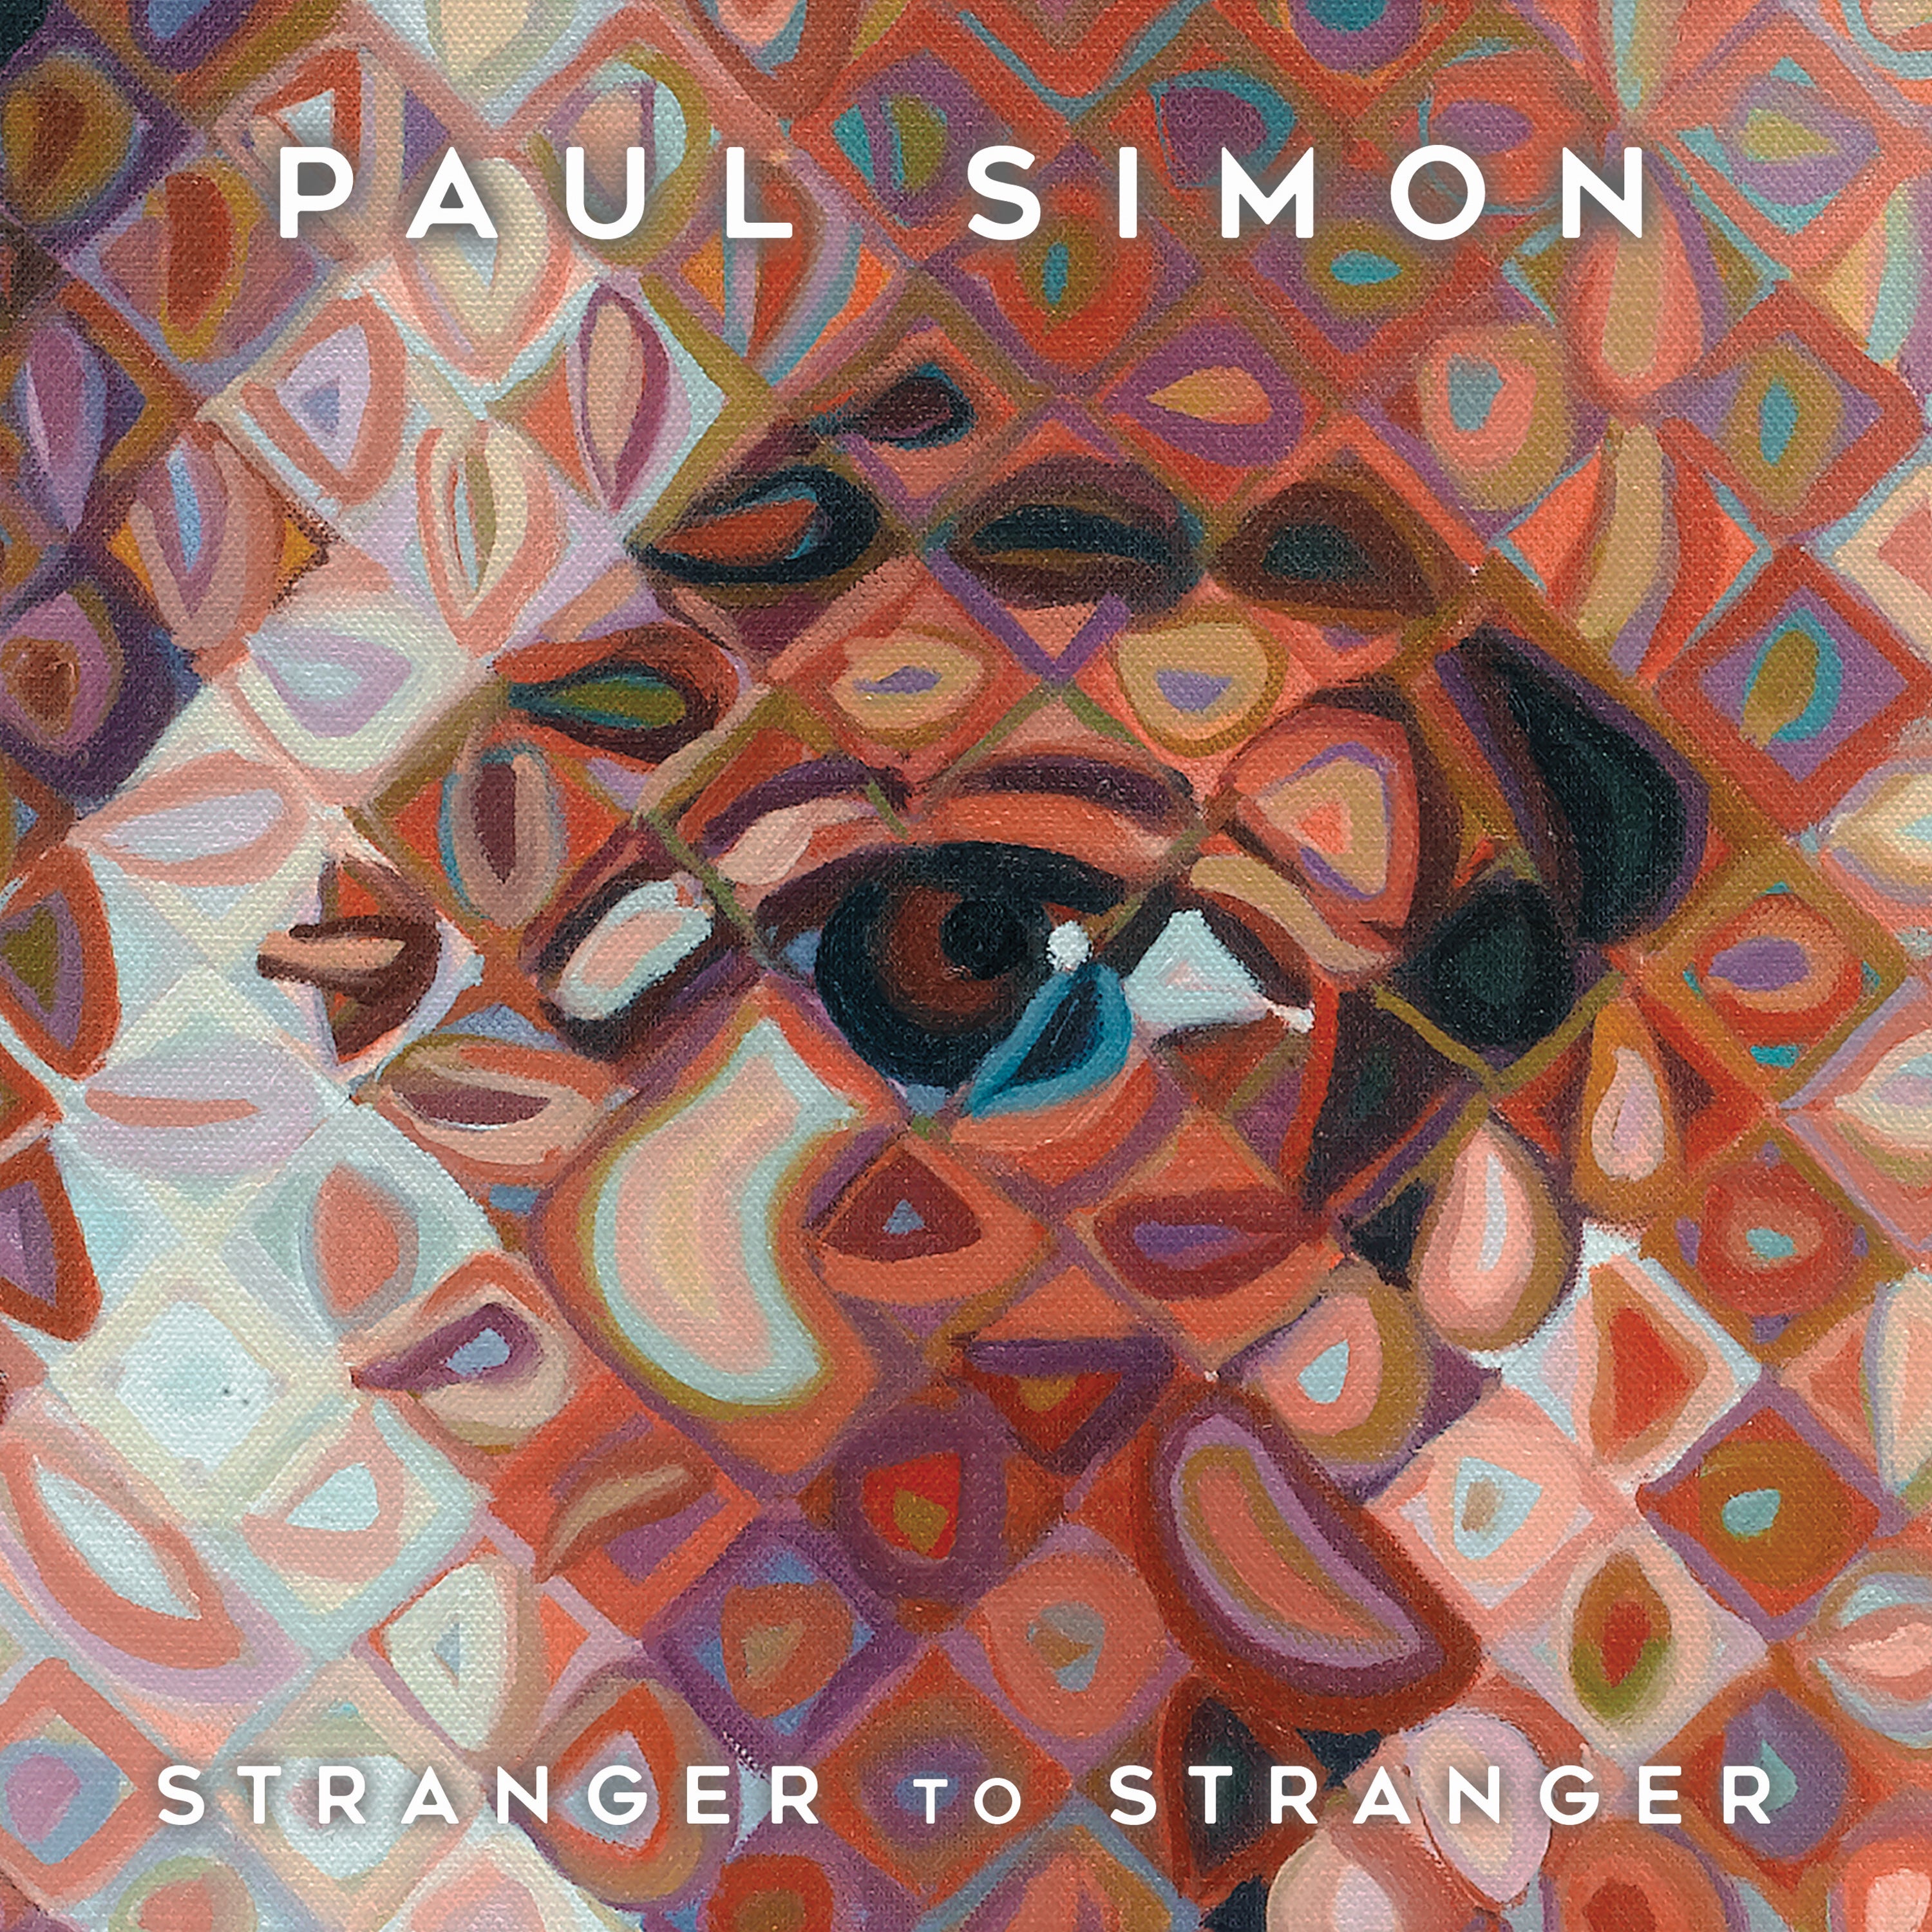 Paul Simon's musical experiments pay off, with ‘Stranger to Stranger’ one of his best albums in several years